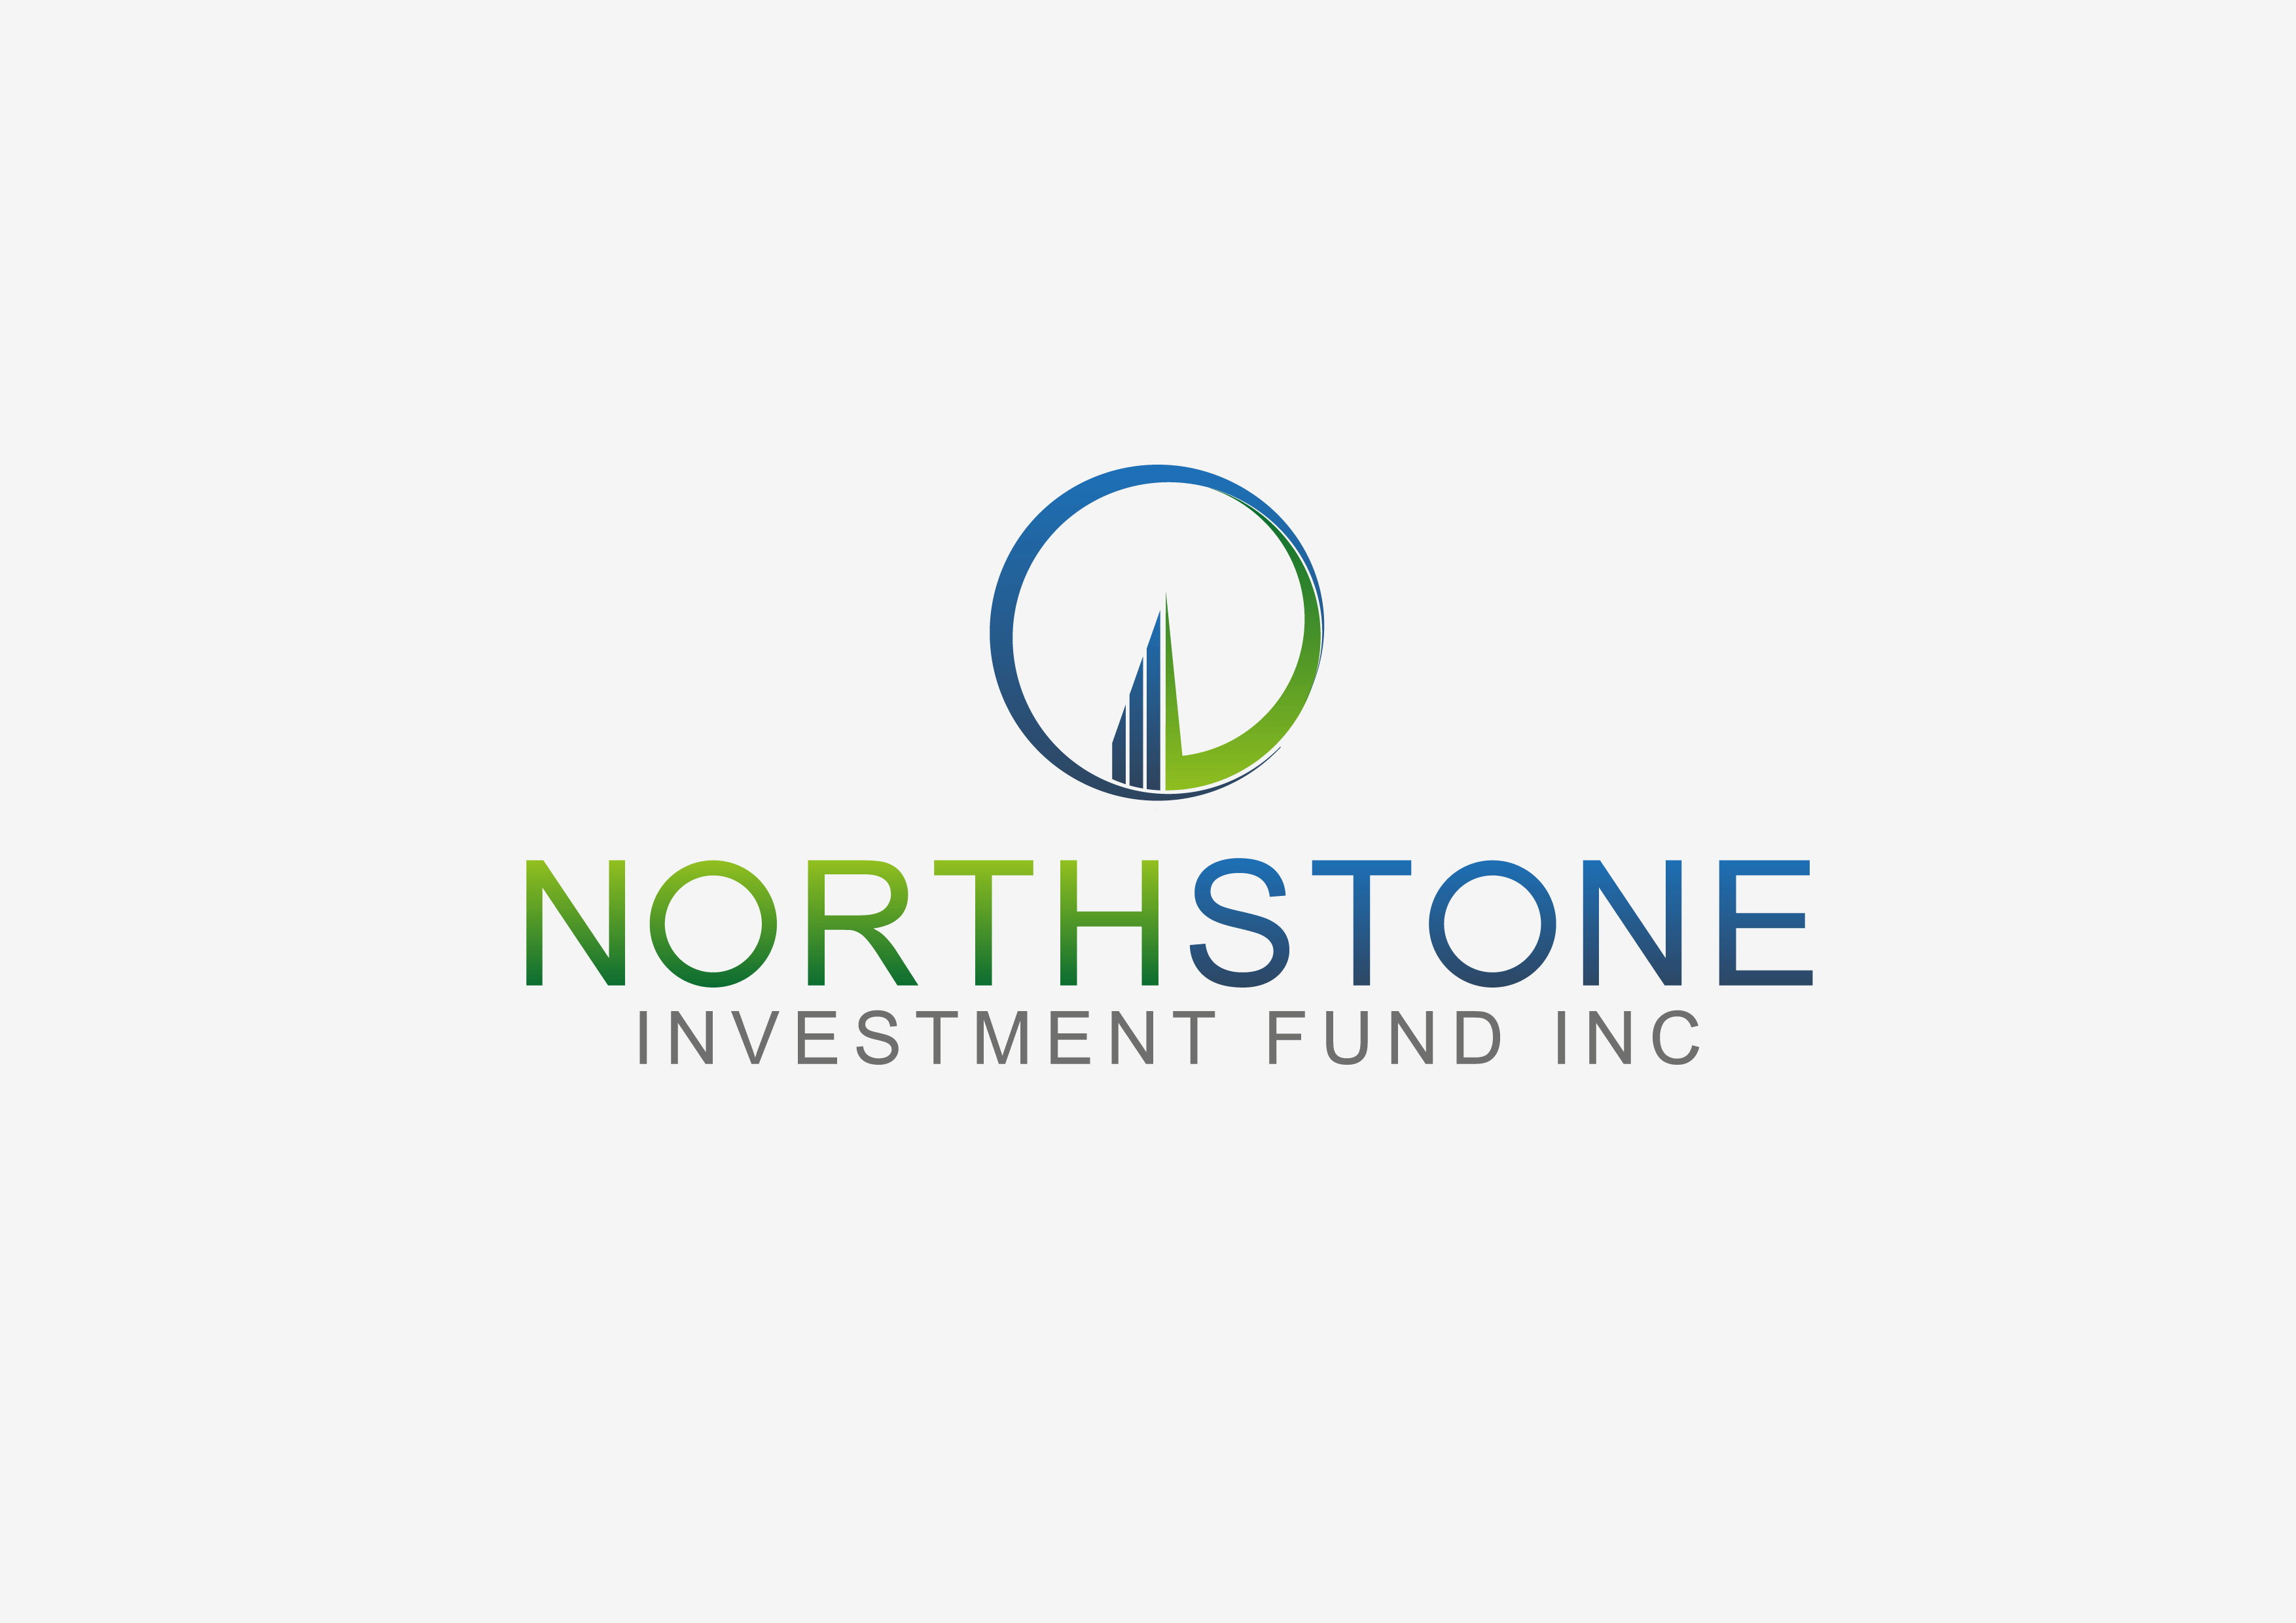 Fund Logo - Unique Logo Design Wanted for NorthStone Investment Fund Inc